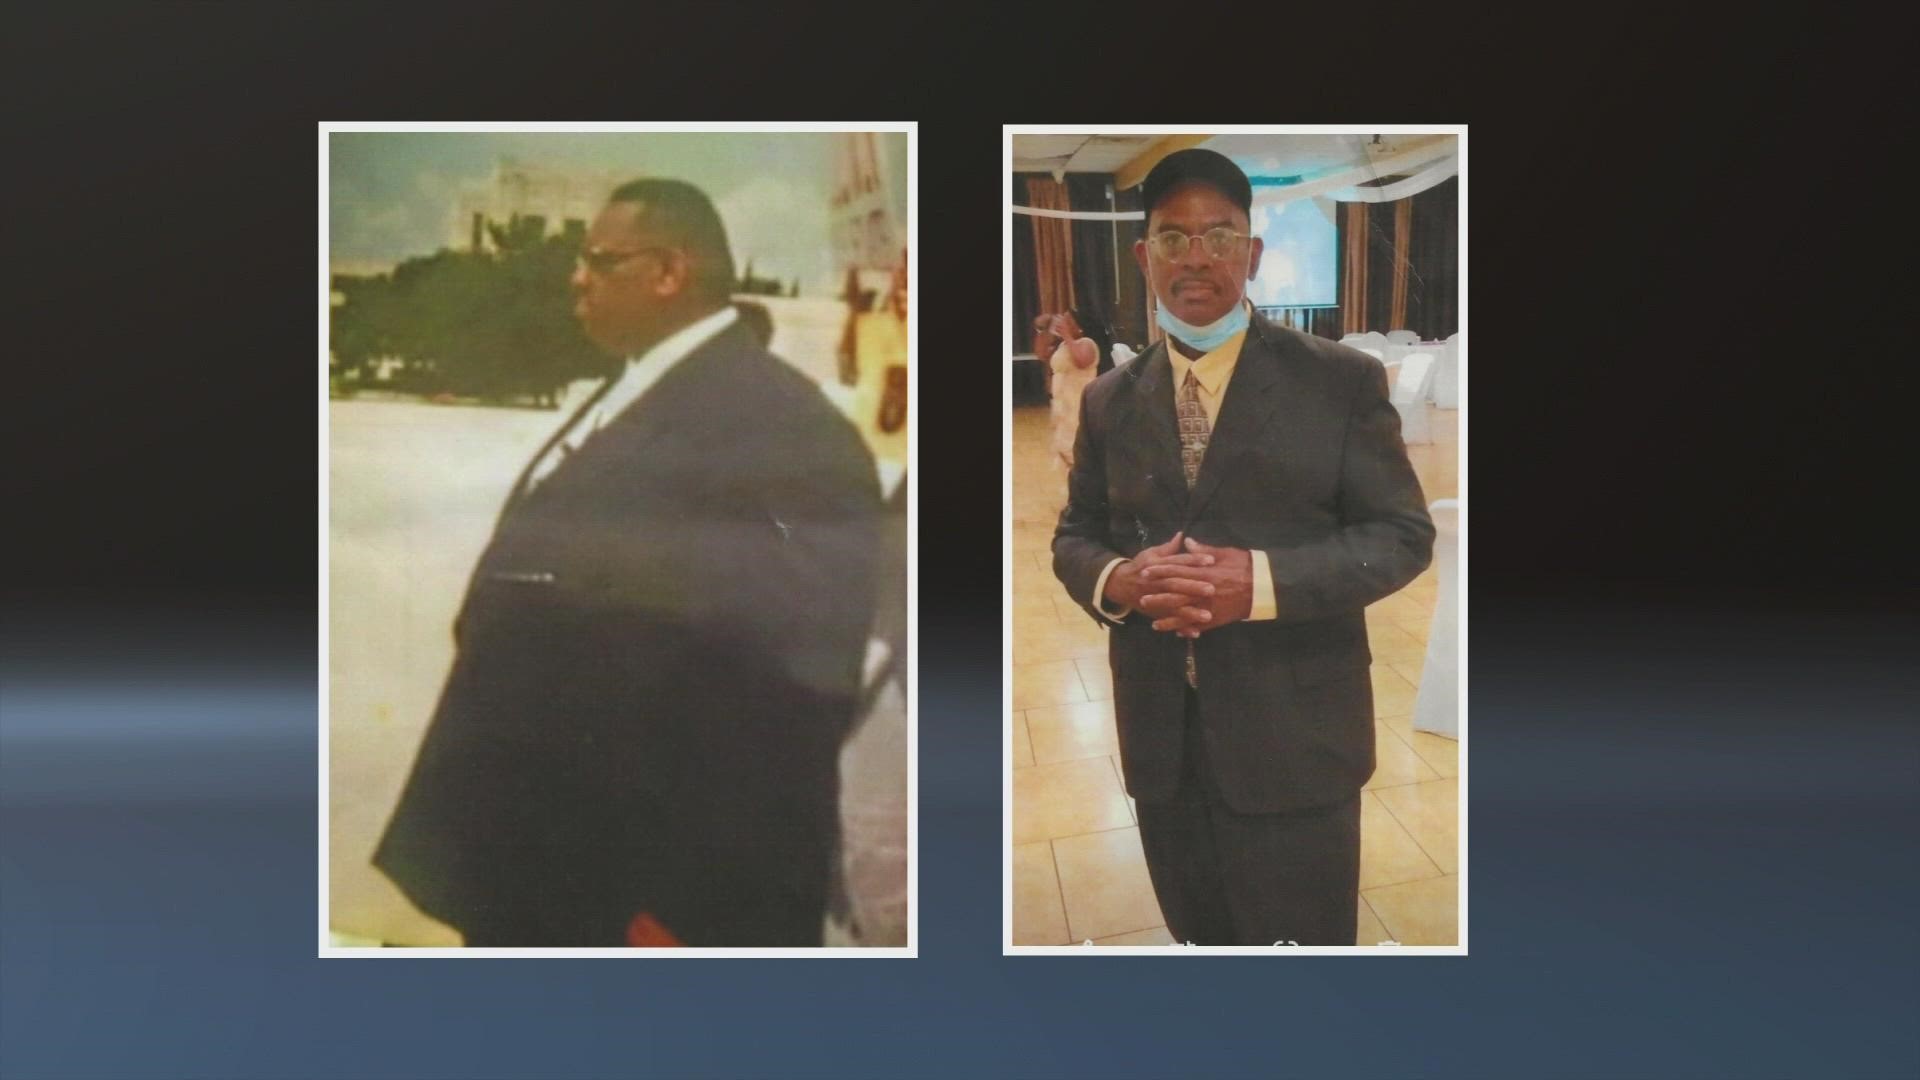 A New Orleans Pastor changed his life after his health started to take a turn. He went down half of his body weight on his own.